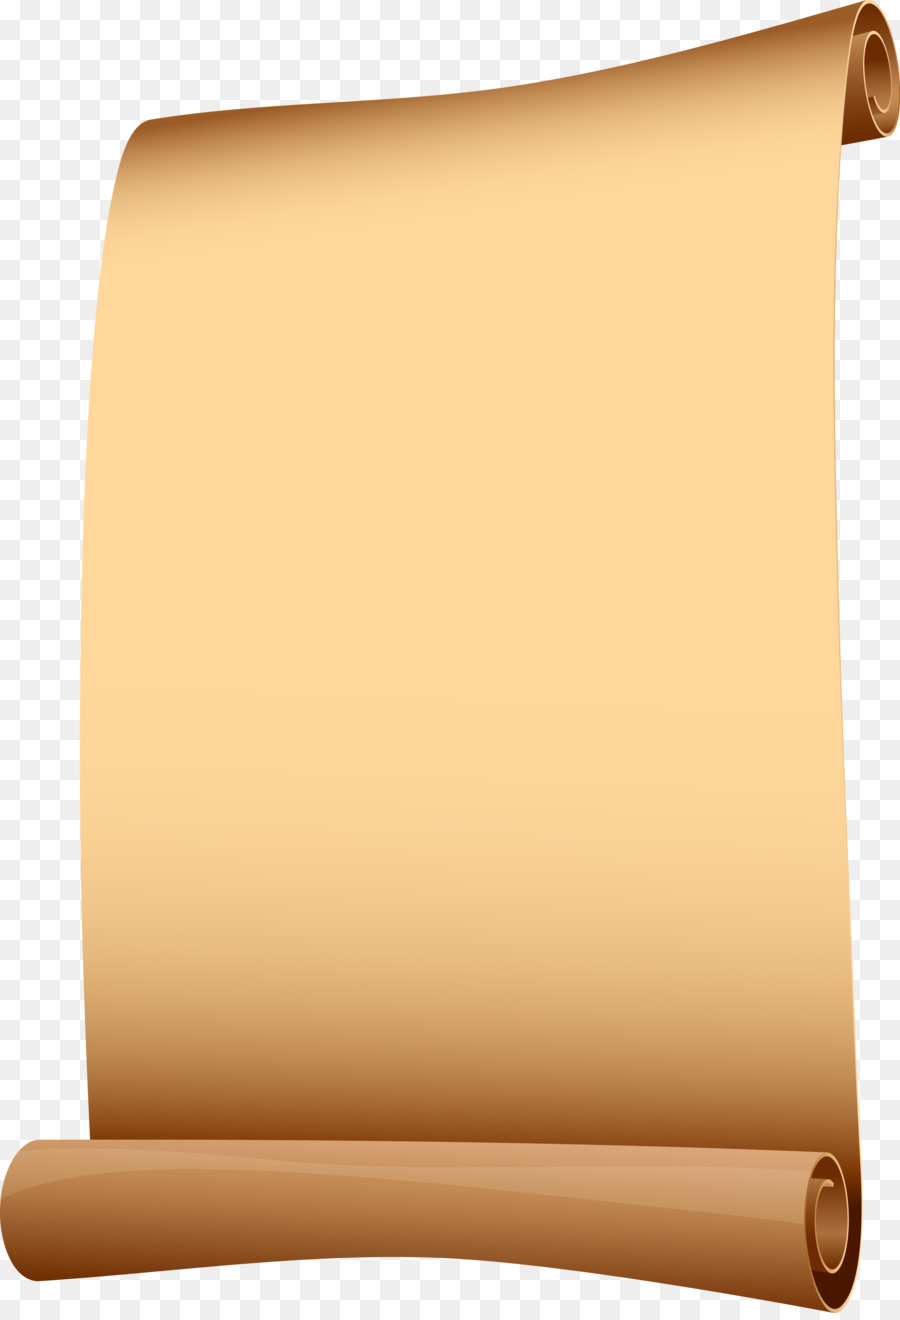 Paper Scroll Computer file - Chinese wind vector scroll png download - 2764*4033 - Free Transparent Paper png Download.